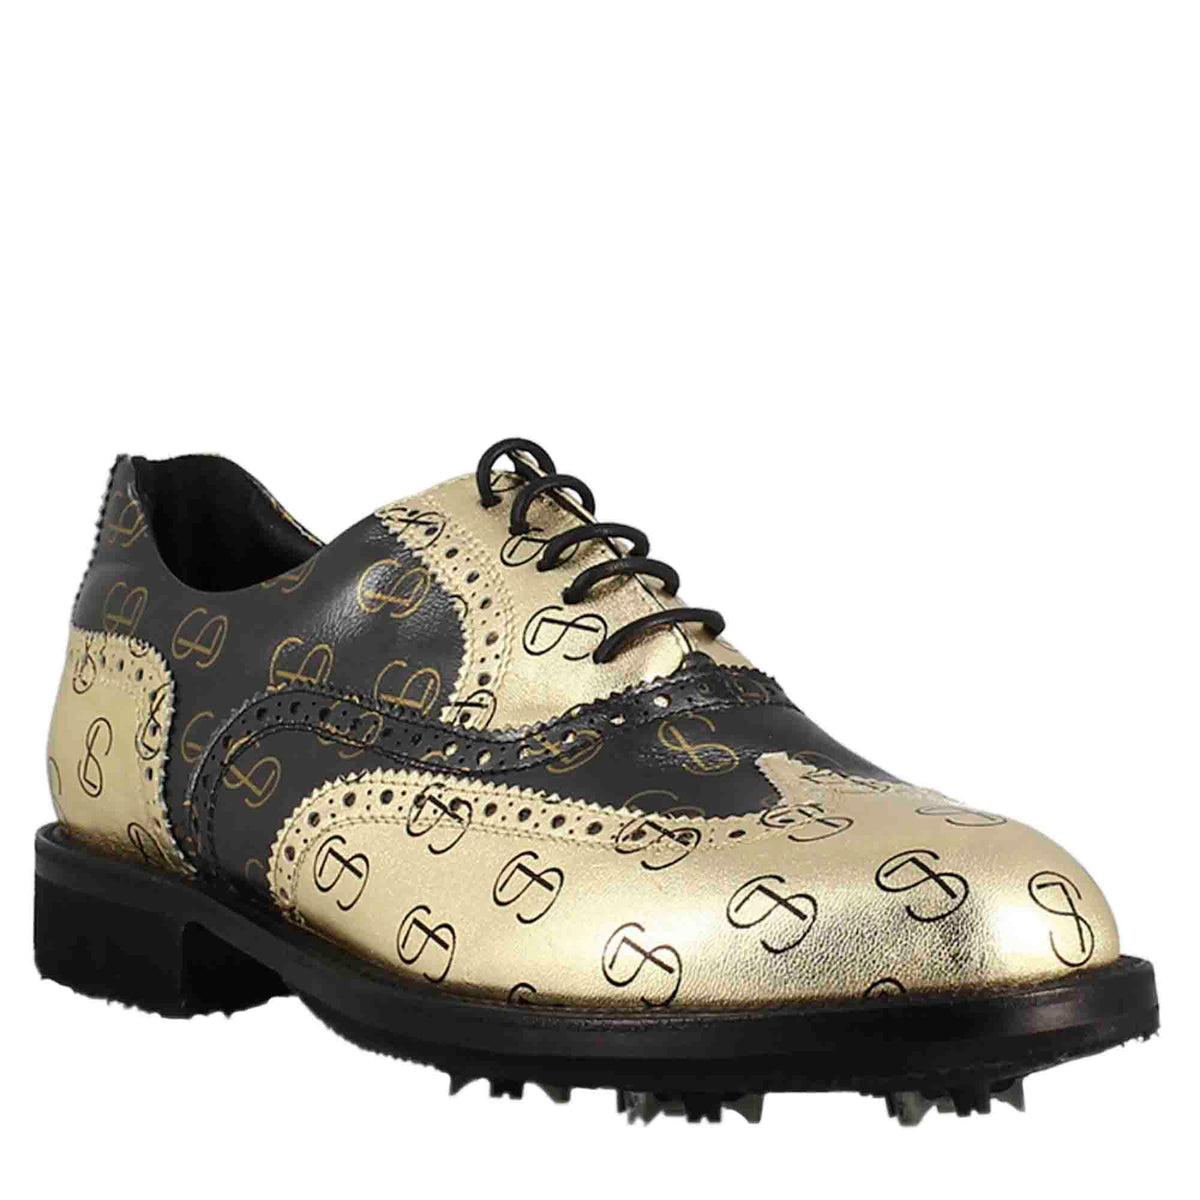 Women's two-tone black and gold full-grain leather golf shoes